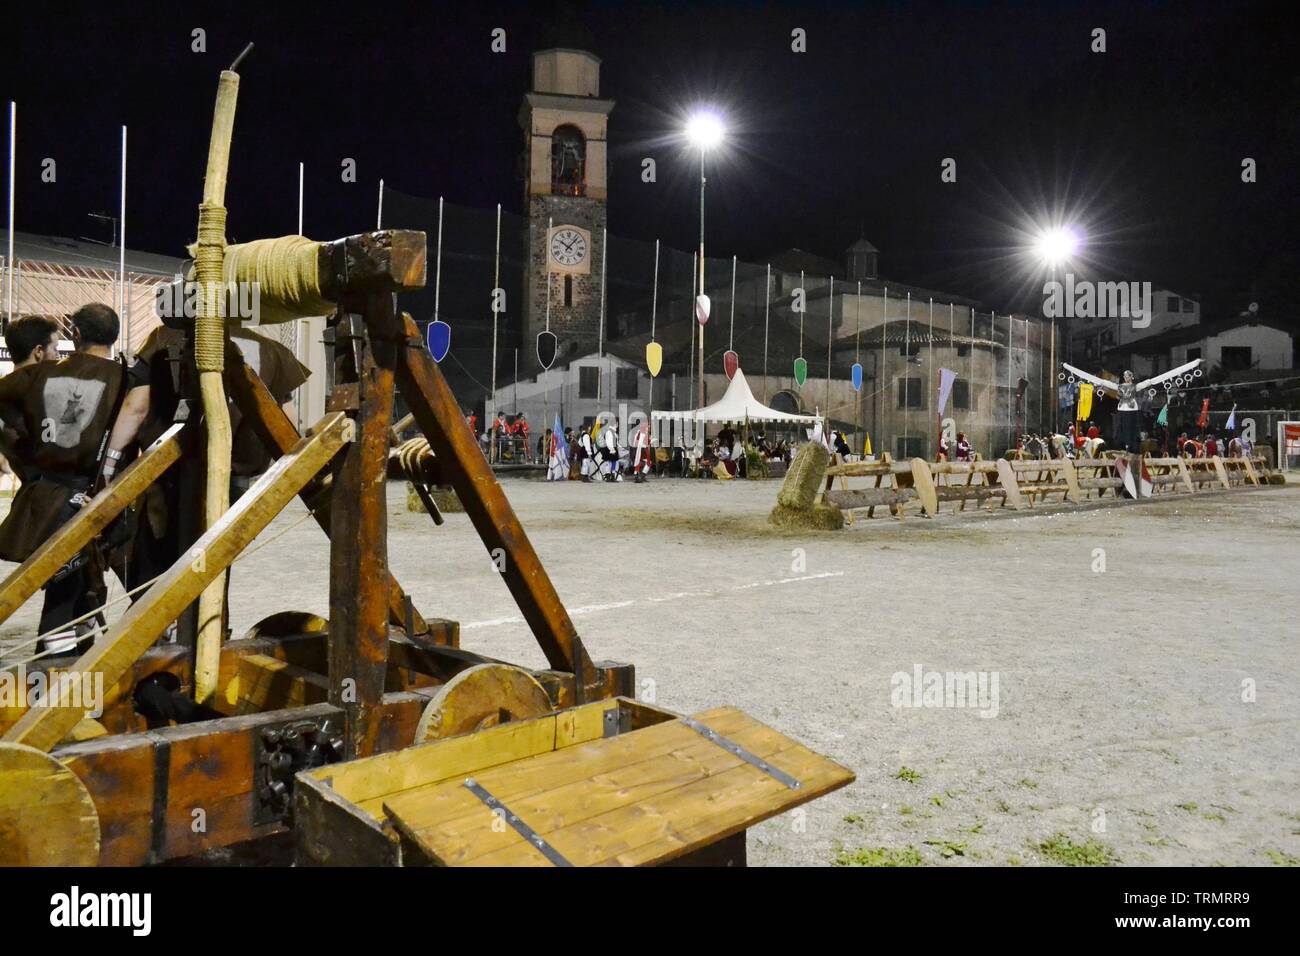 Primaluna/Italy - June 21, 2014: Medieval catapult wooden engine exposed during the traditional village festival of six fractions of the town. Stock Photo